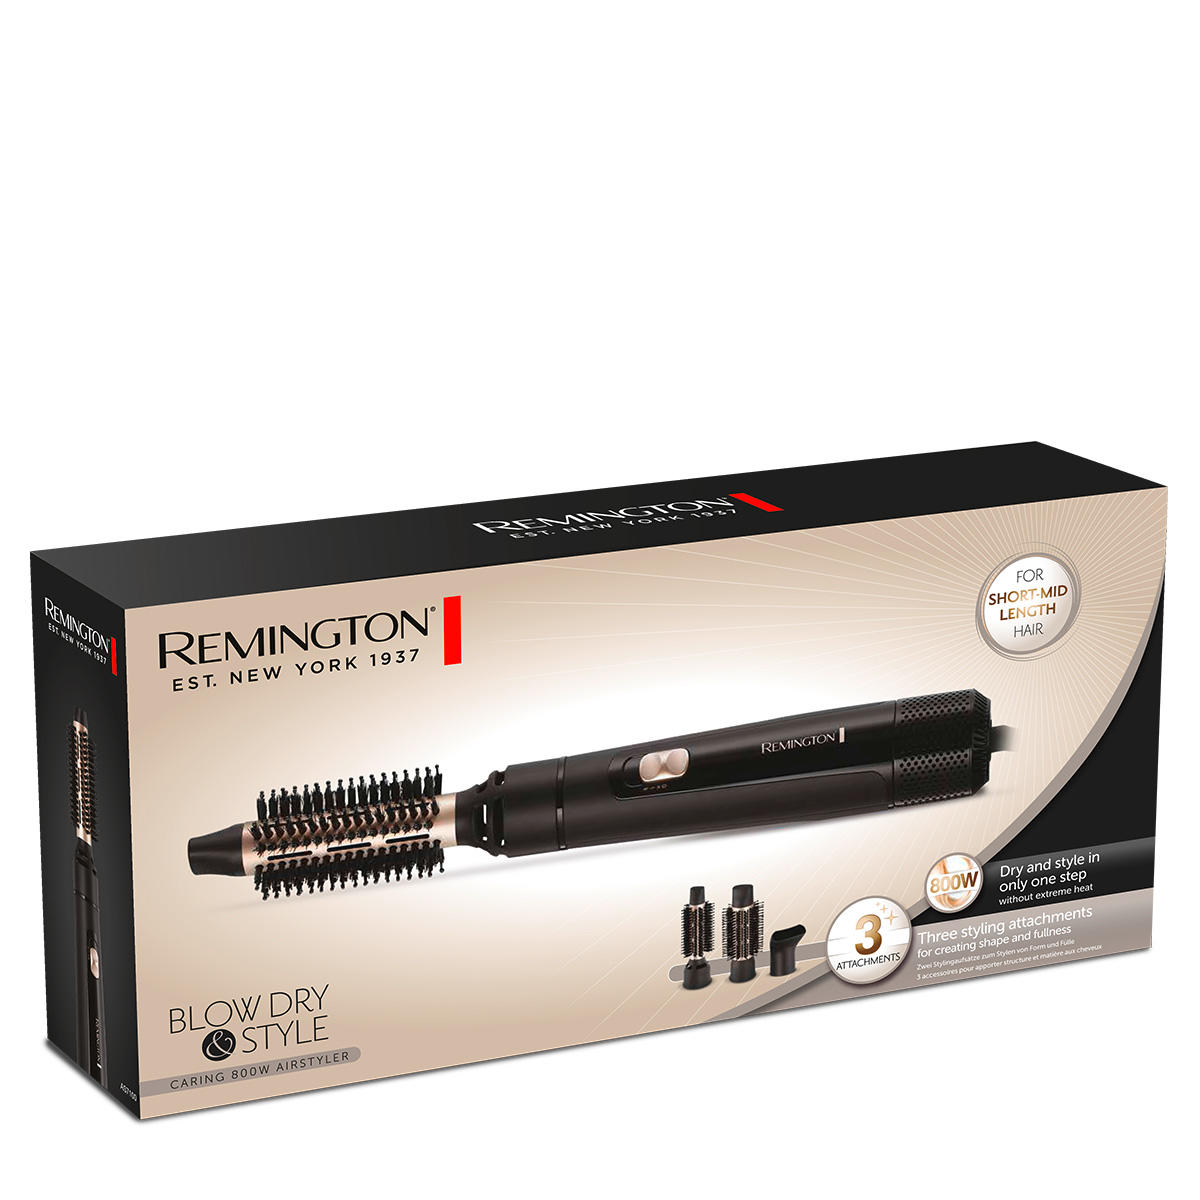 Remington AS7300 Blow Dry & Style Air Styler  - 2